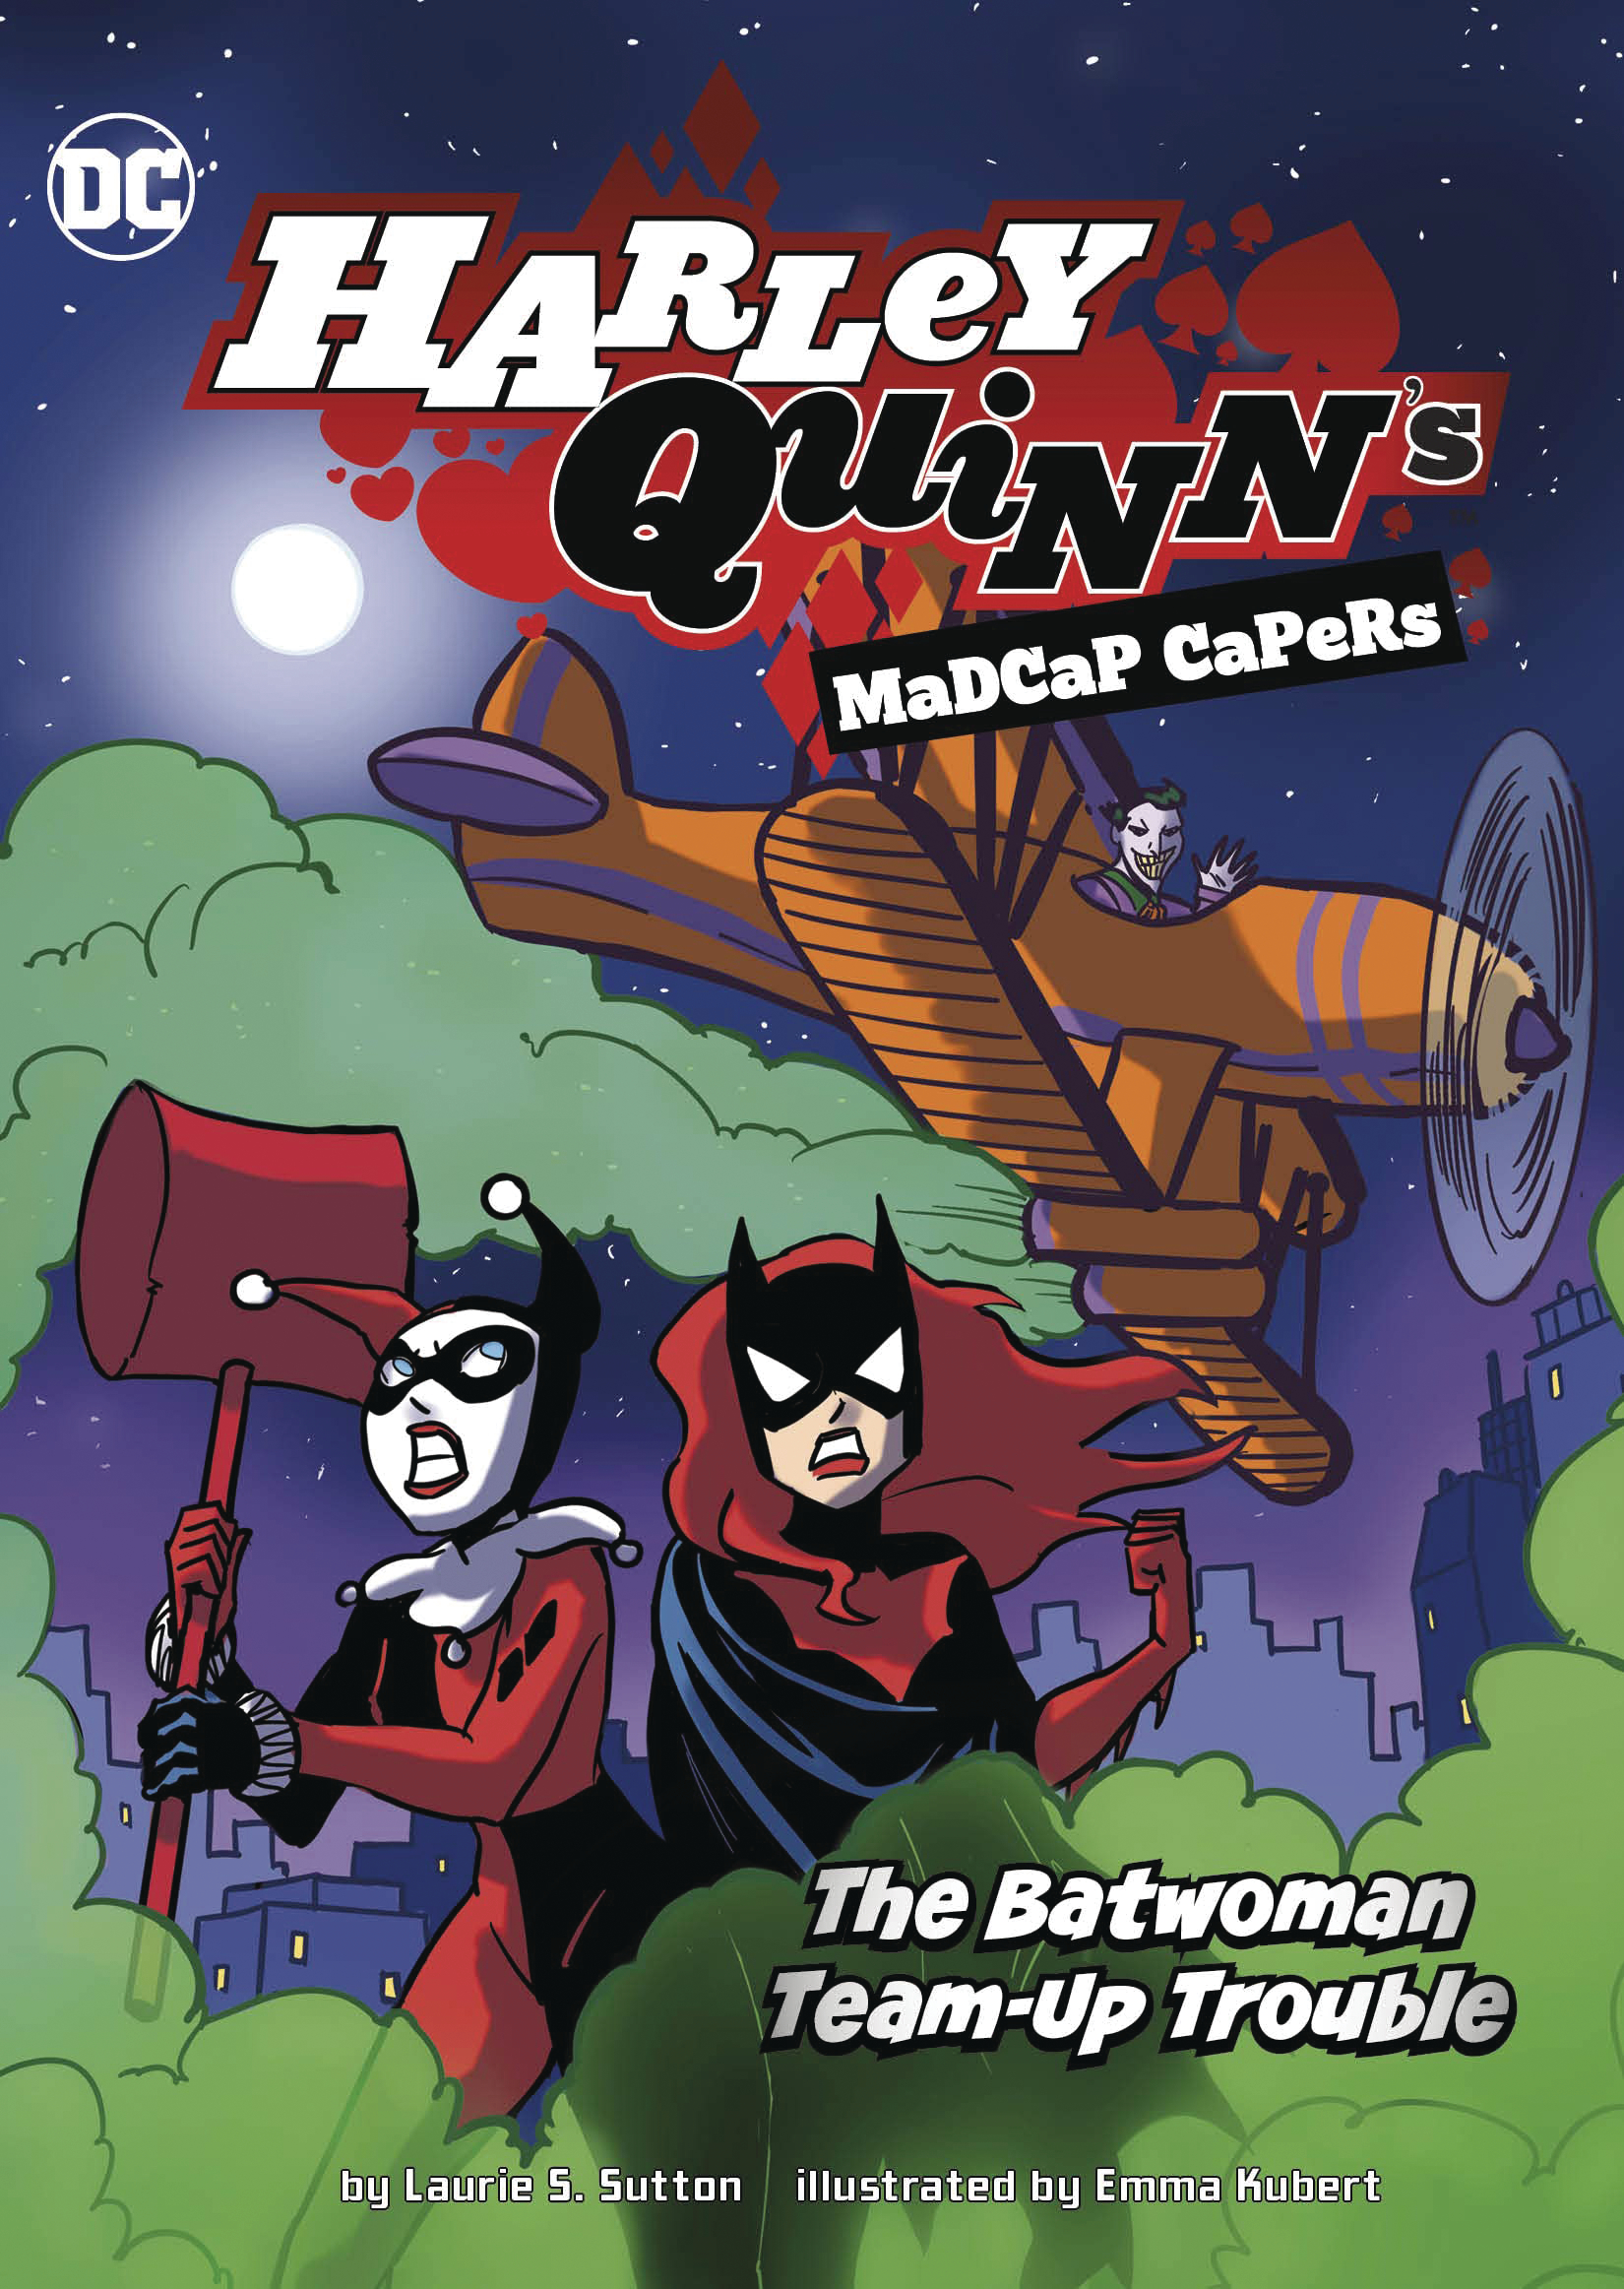 Harley Quinn Madcap Capers #7 Batwomans Team Up Trouble